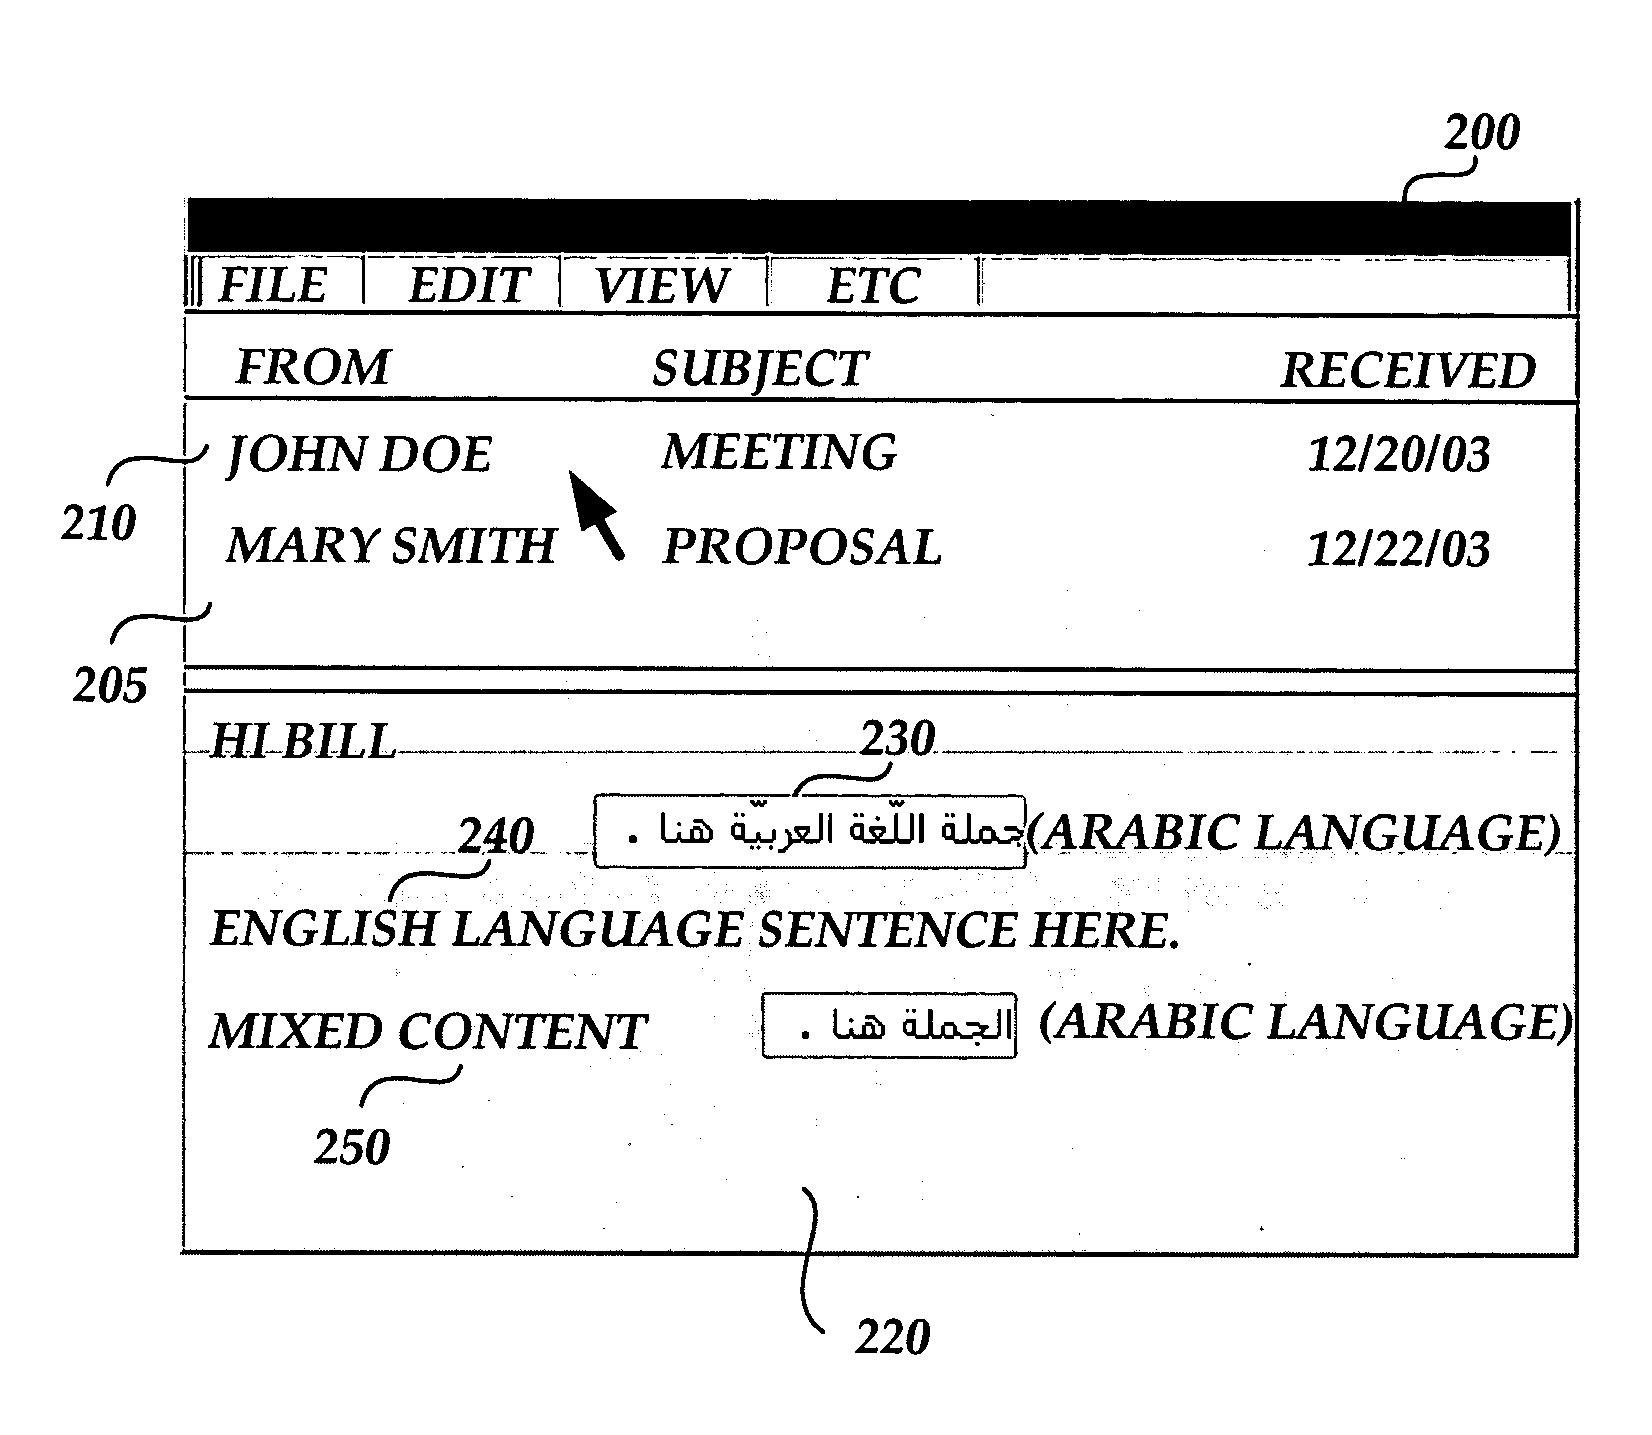 Display of text in a multi-lingual environment